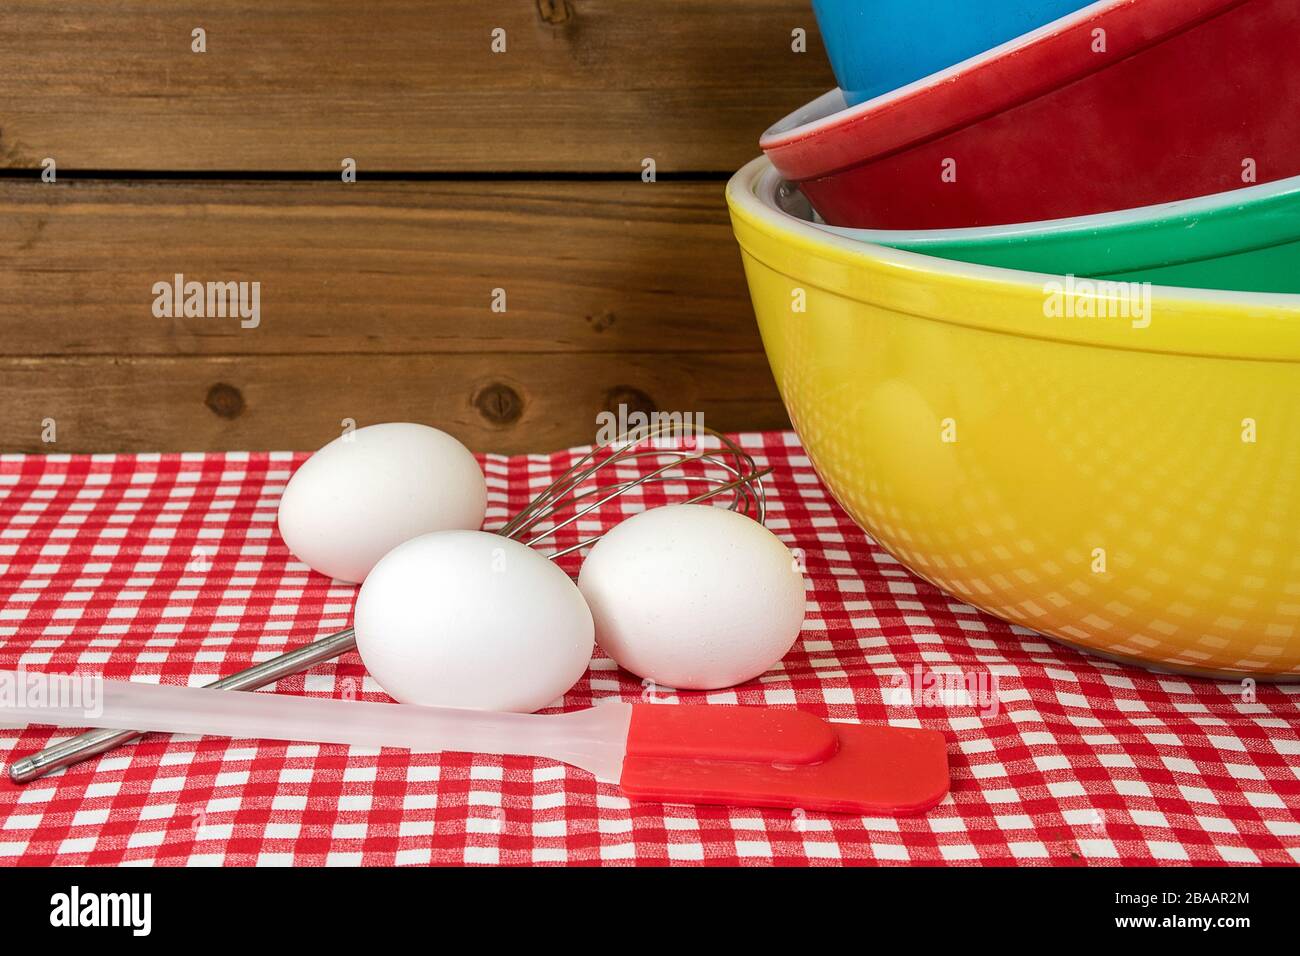 https://c8.alamy.com/comp/2BAAR2M/stack-of-retro-mixing-bowls-on-checkered-tablecloth-with-white-eggs-and-kitchen-utensils-2BAAR2M.jpg